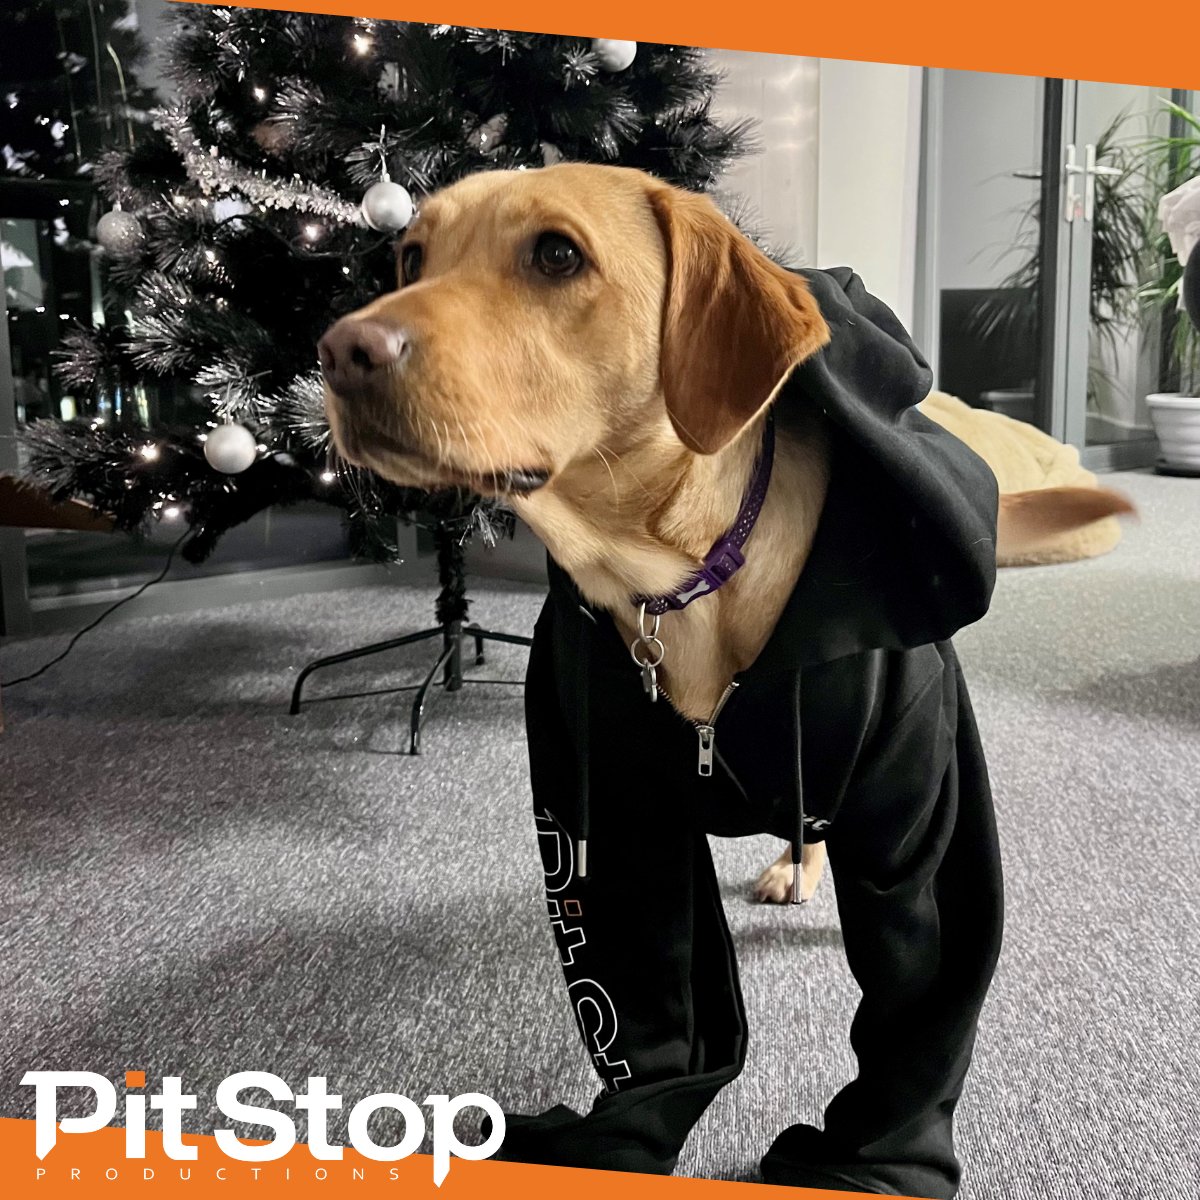 We're signing off 2023 by wishing you all Happy Holidays from our newest team member... Maggie! Maggie's showing off some of our brand new merch Santa brought the team this year, and she wishes you all a Merry Christmas, and a Paw-some 2024! 🎮 🧡